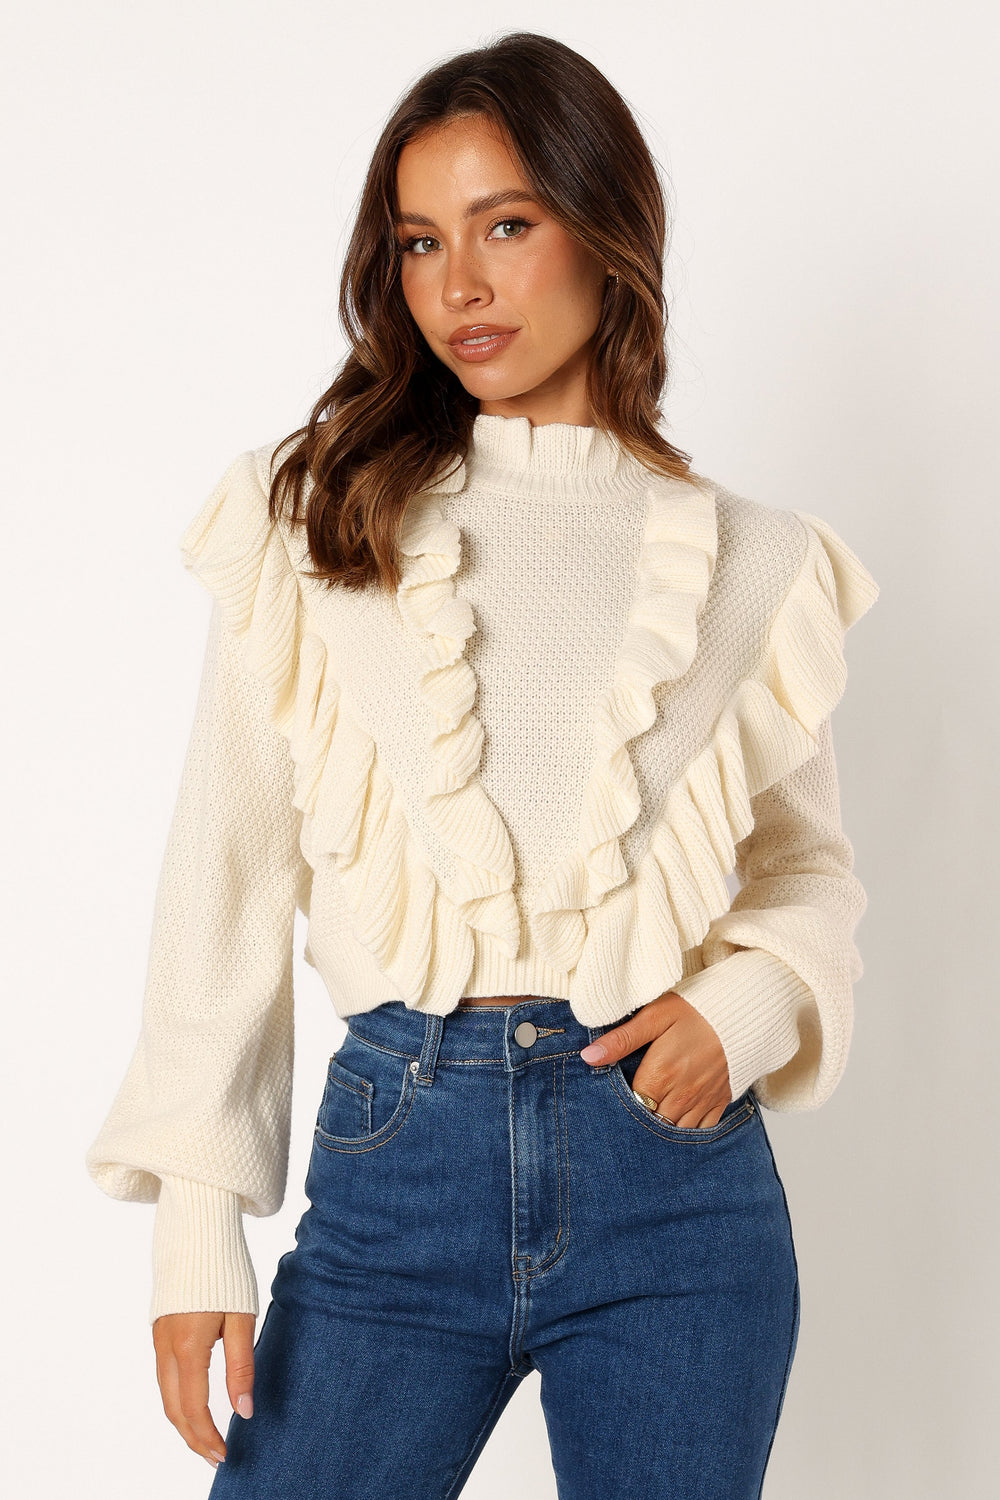 Petal and Pup USA TOPS Charice Knit Long Sleeve Top - Cream